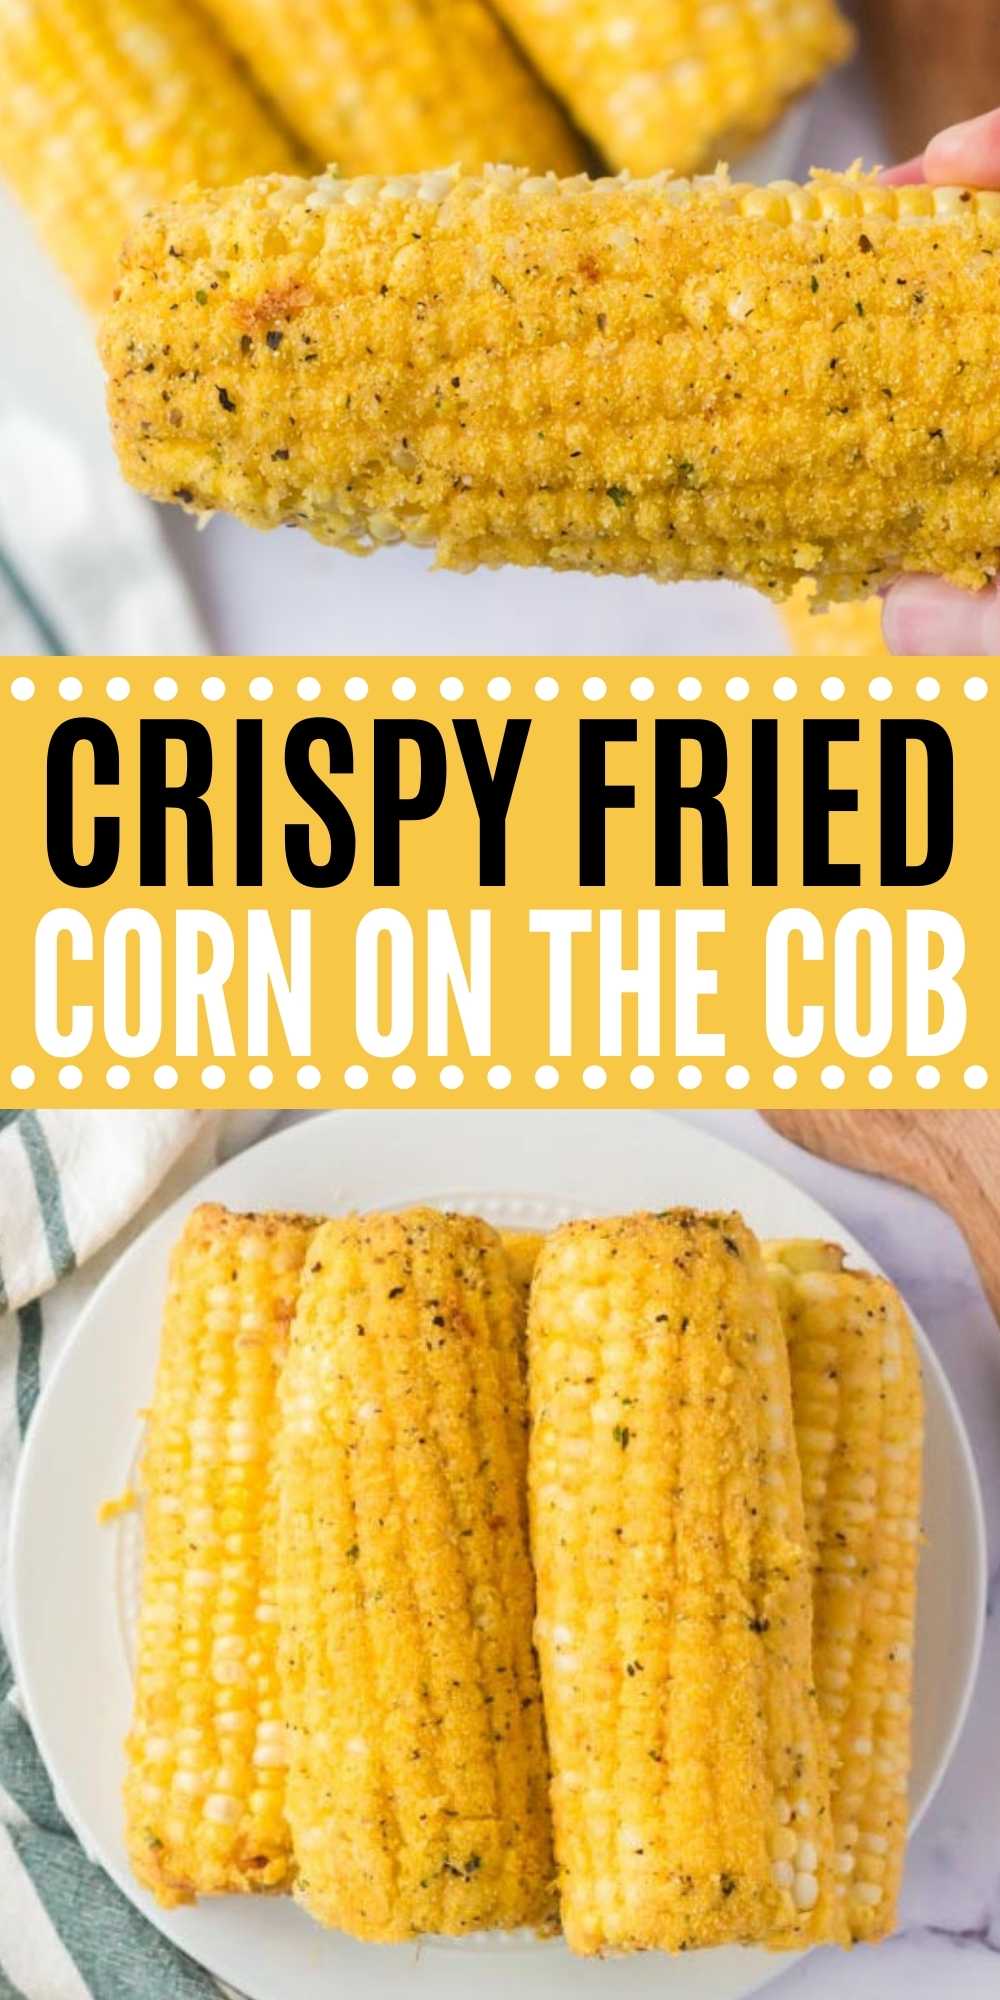 Fried Corn on the Cob is a great side dish. It is easy to prepare with easy ingredients. Your favorite fair food can now be prepared at home. Learn how to fry corn on the cob with this super simple recipe. #eatingonadime #sidedishes #sidedishrecipes #fairfood #cornonthecobrecipes 